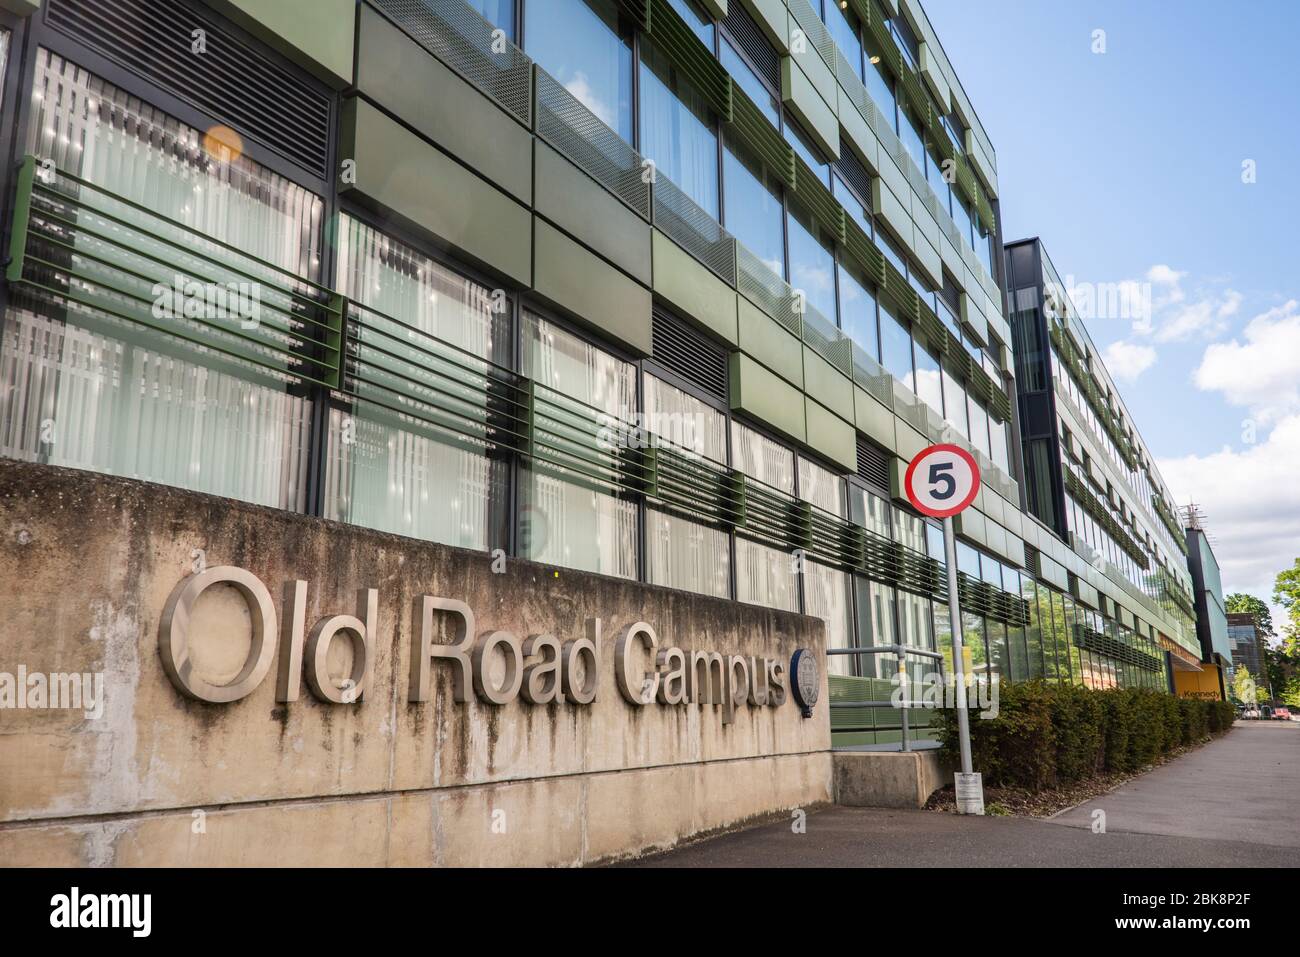 The Jenner Institute, Headington, Oxford, where development of a vaccine for Covid-19 is underway. Stock Photo